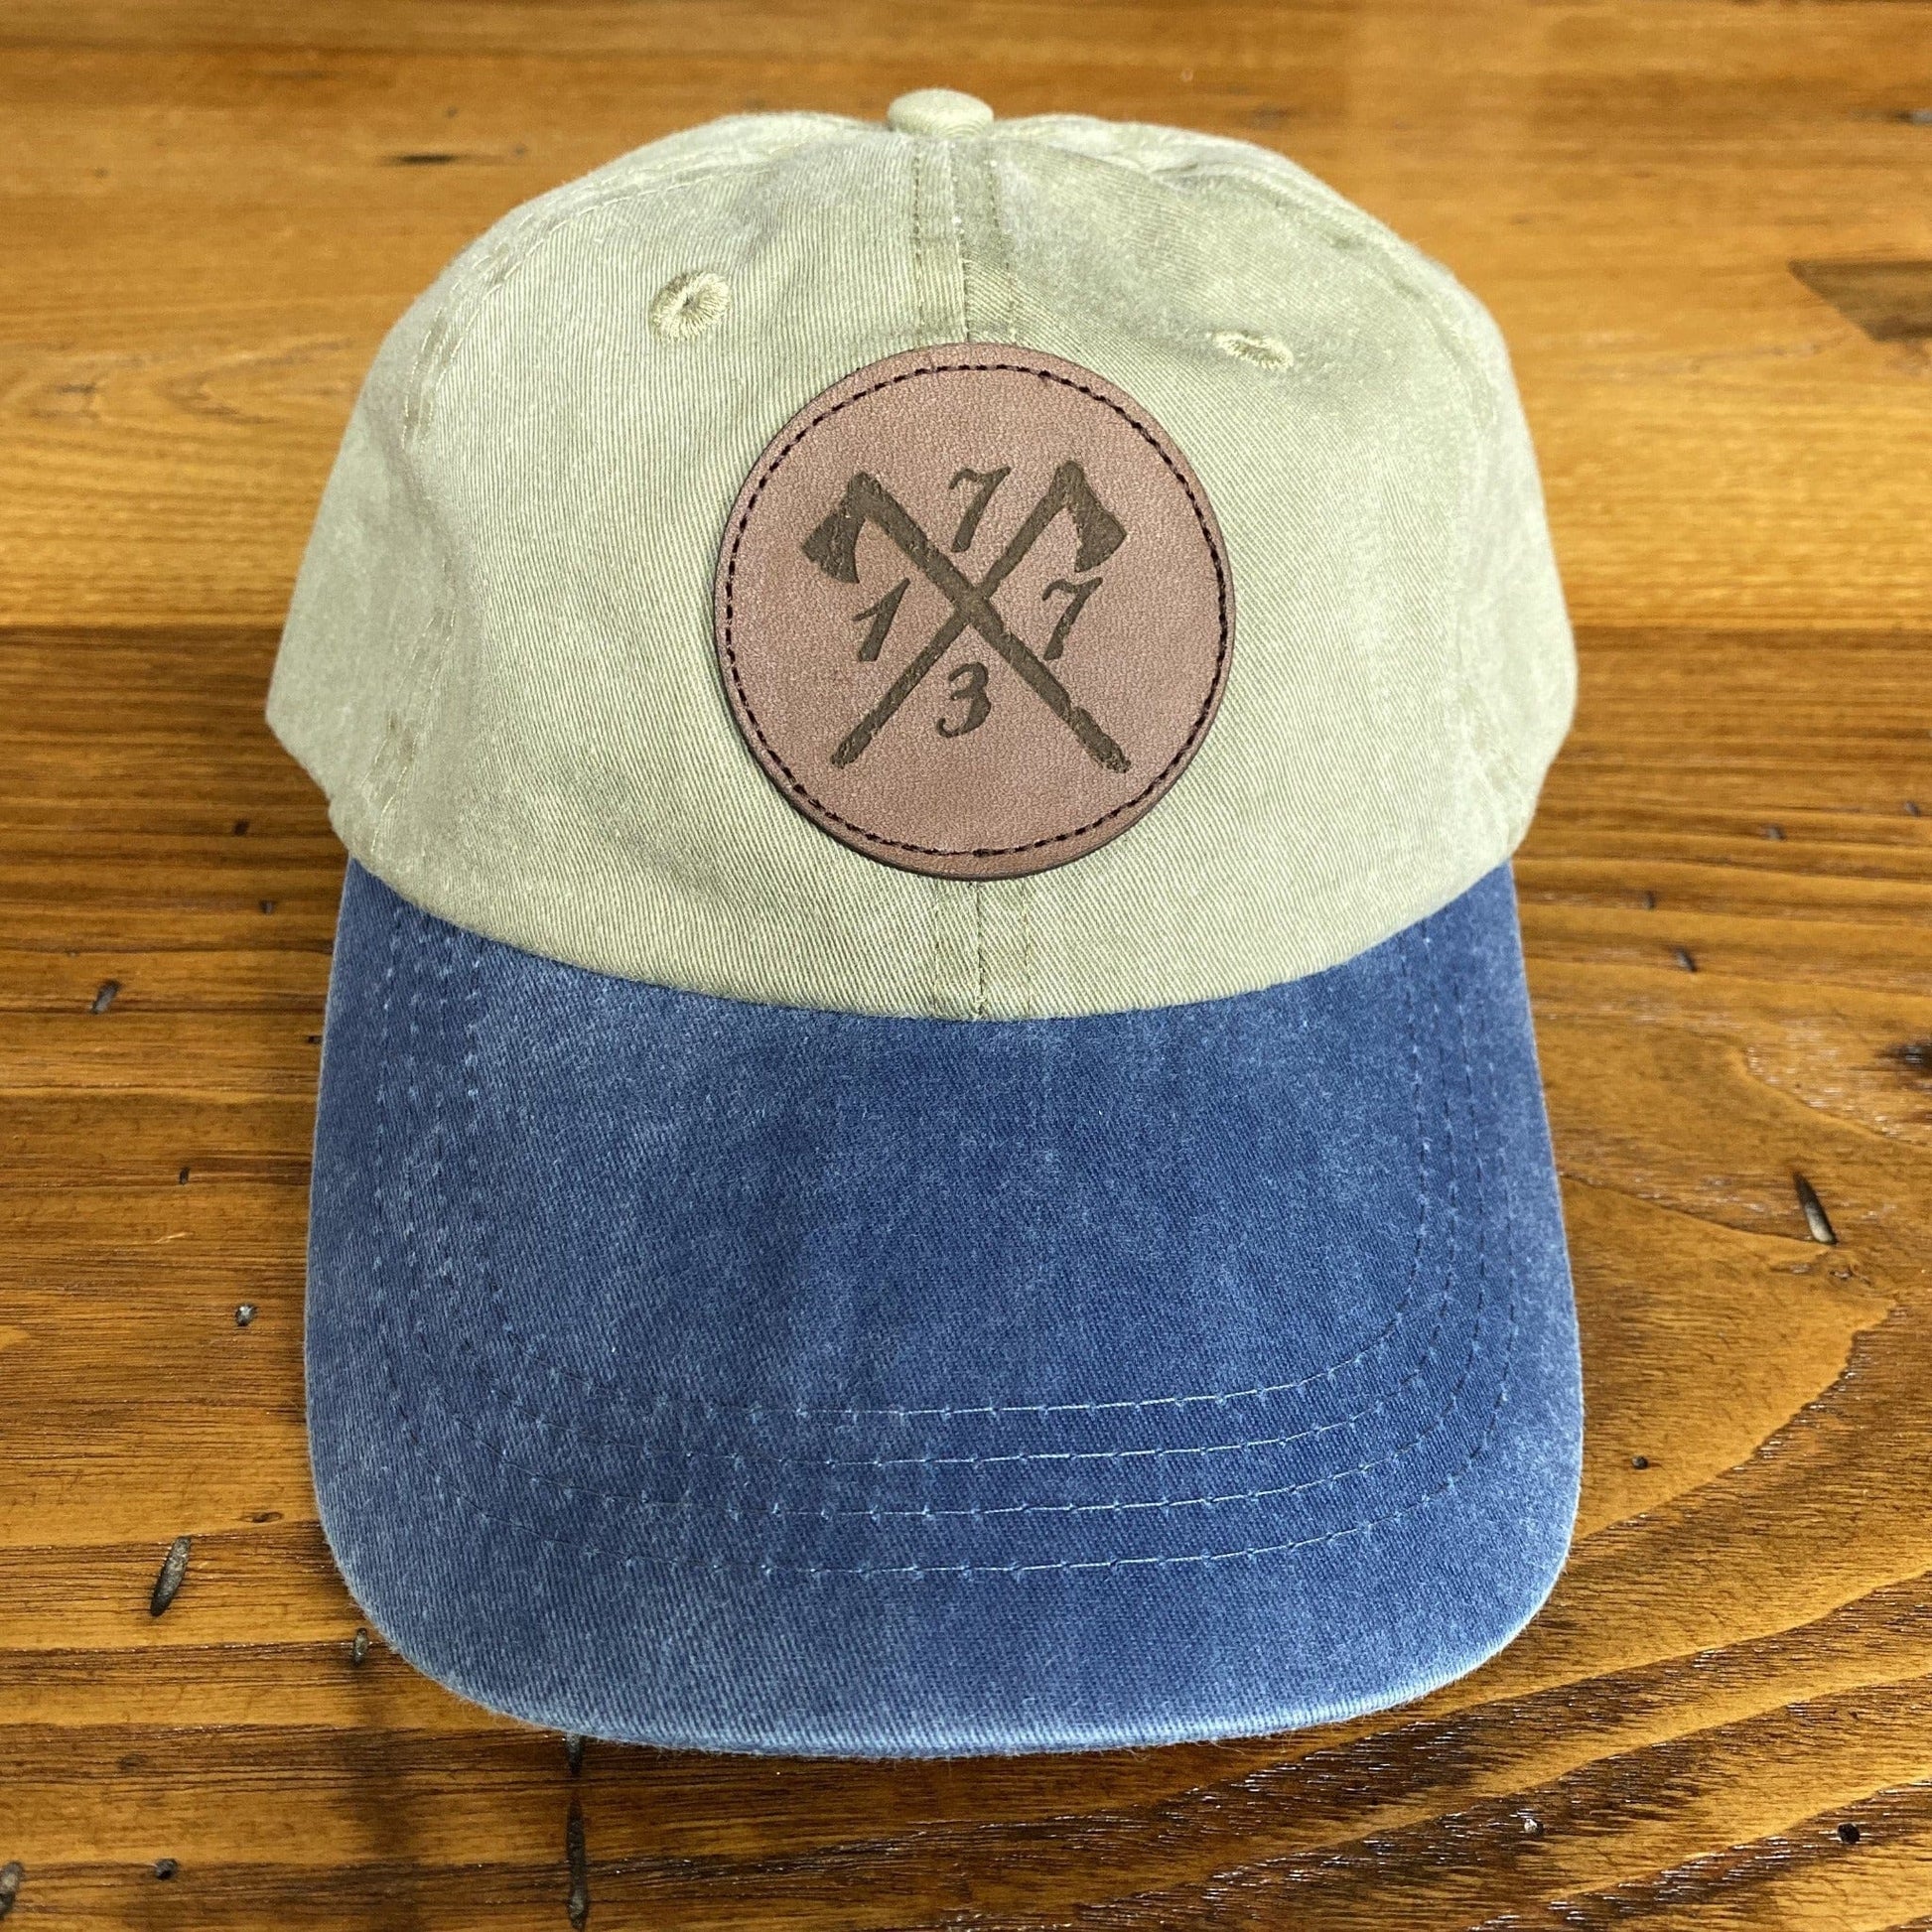 "1773" Boston Tea Party Leather patch cap - Khaki & Navy Blue - For hardcore history folks from The History List store